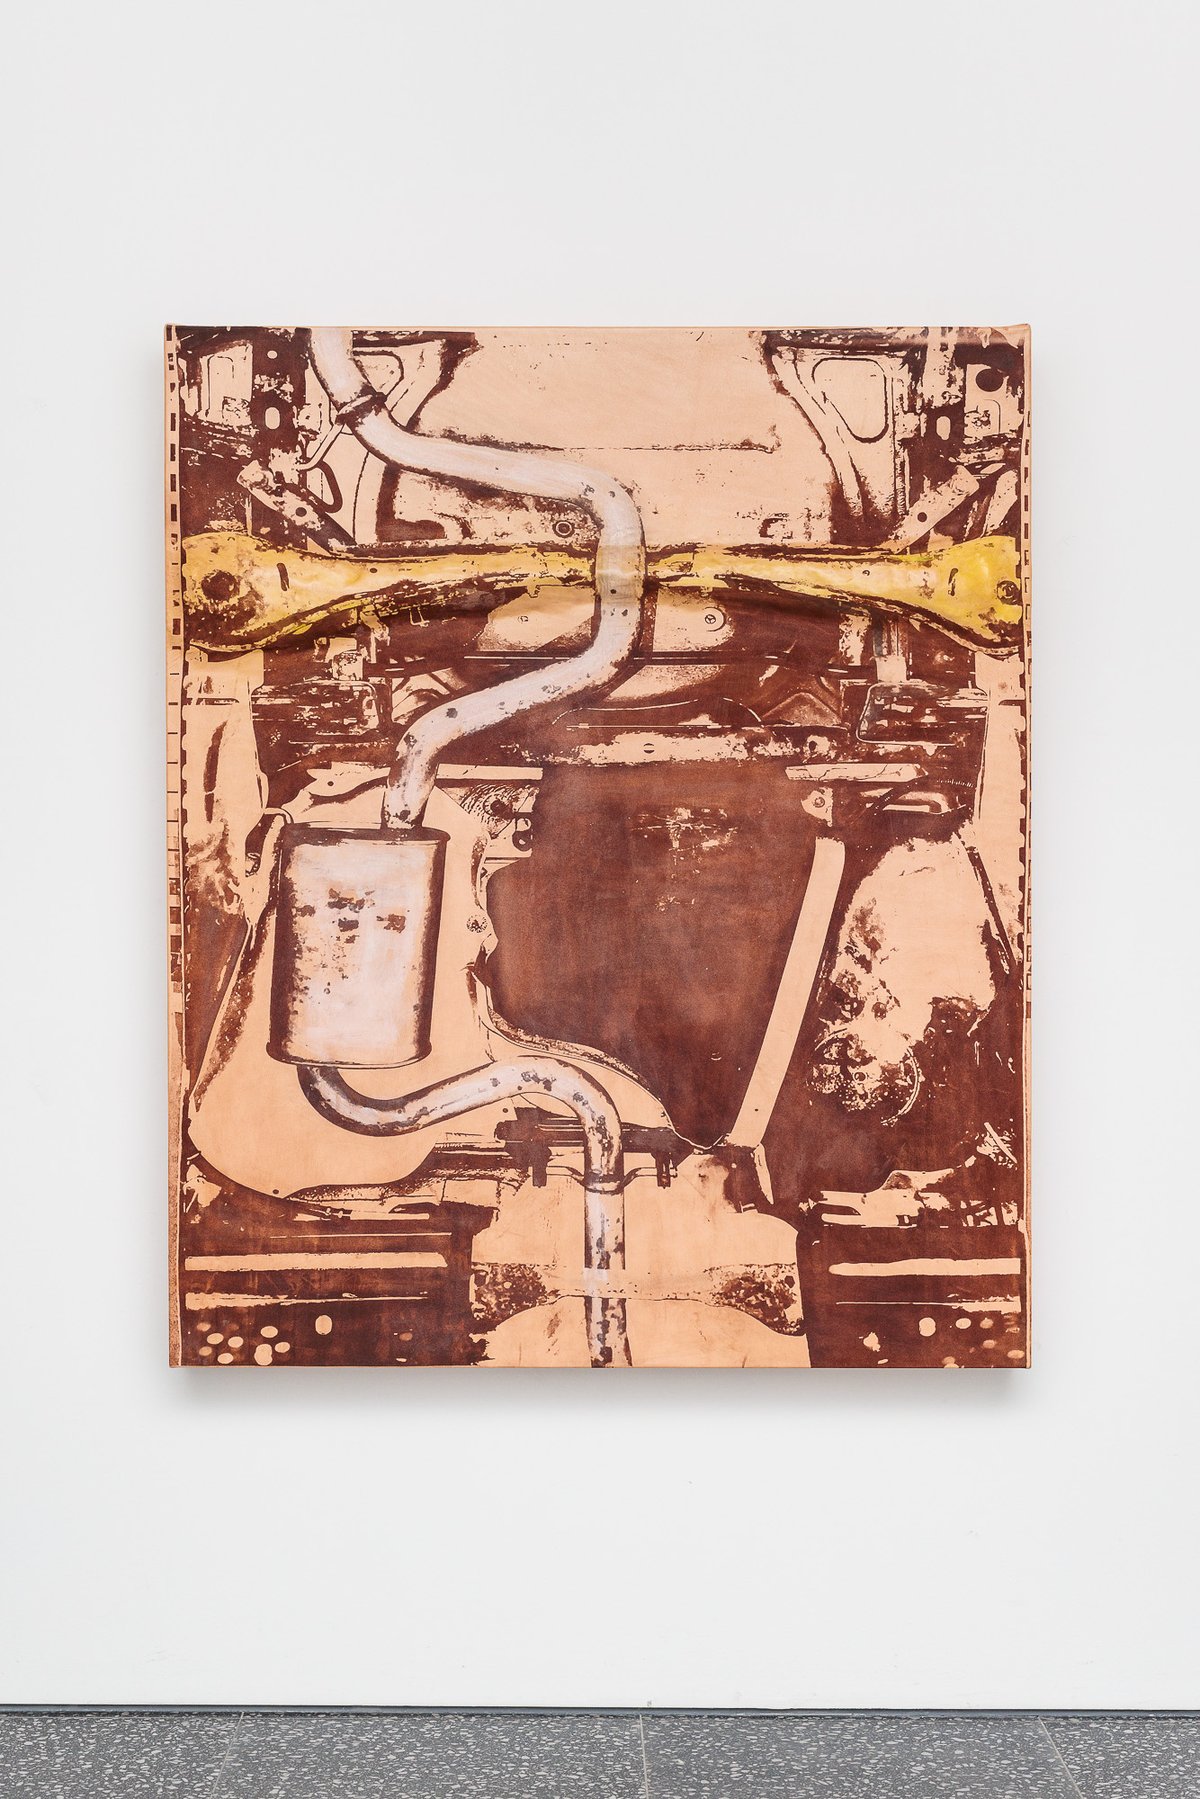 Lena HenkeLena Henke, Combustions 19 [The belly of my car], 2024Laser etched leather, pigment on wooden panel150 x 125 x 15 cm